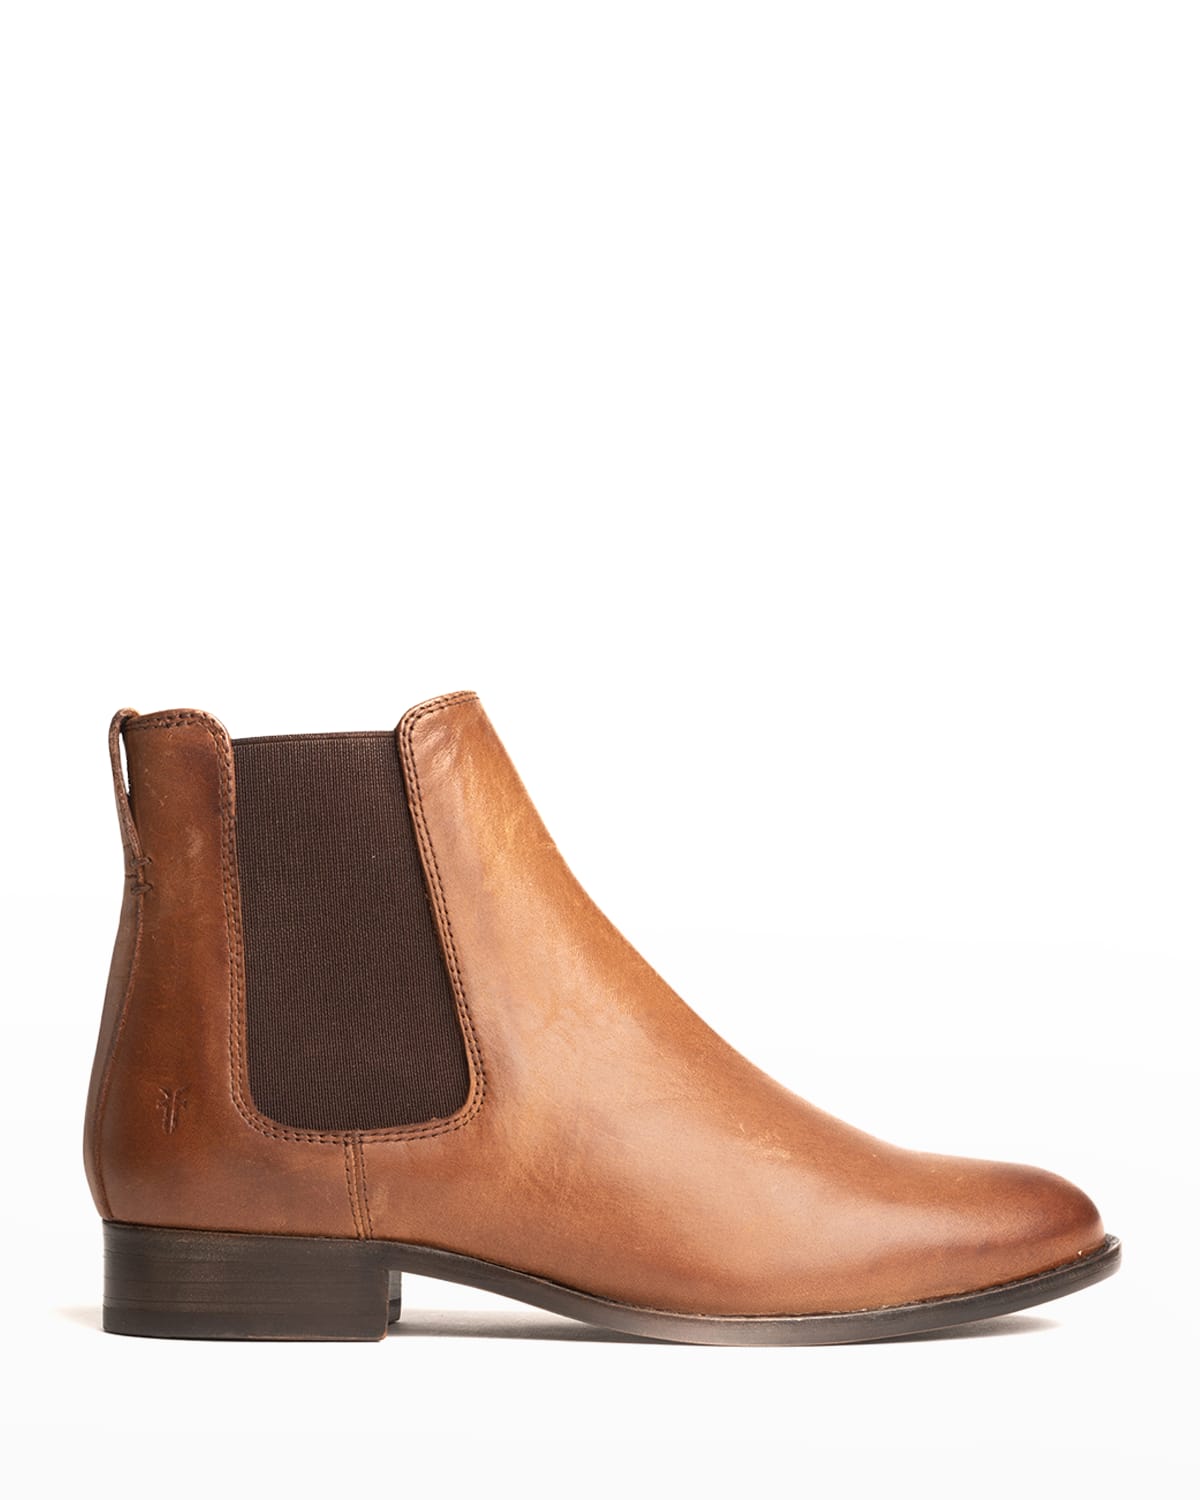 Frye Carly Leather Chelsea Booties